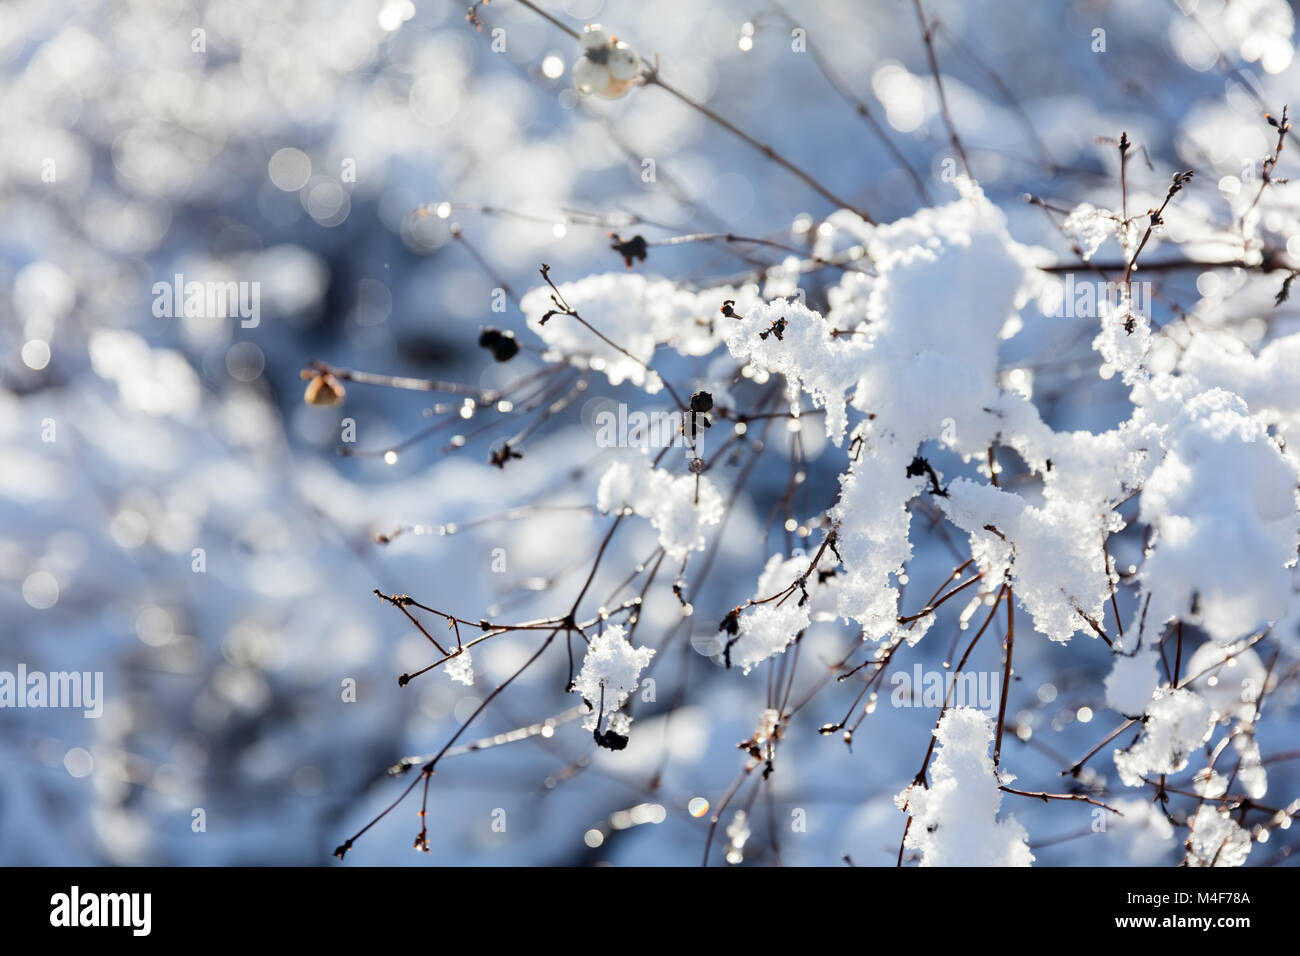 Winter tree, branches in snow and frost close-up. Stock Photo